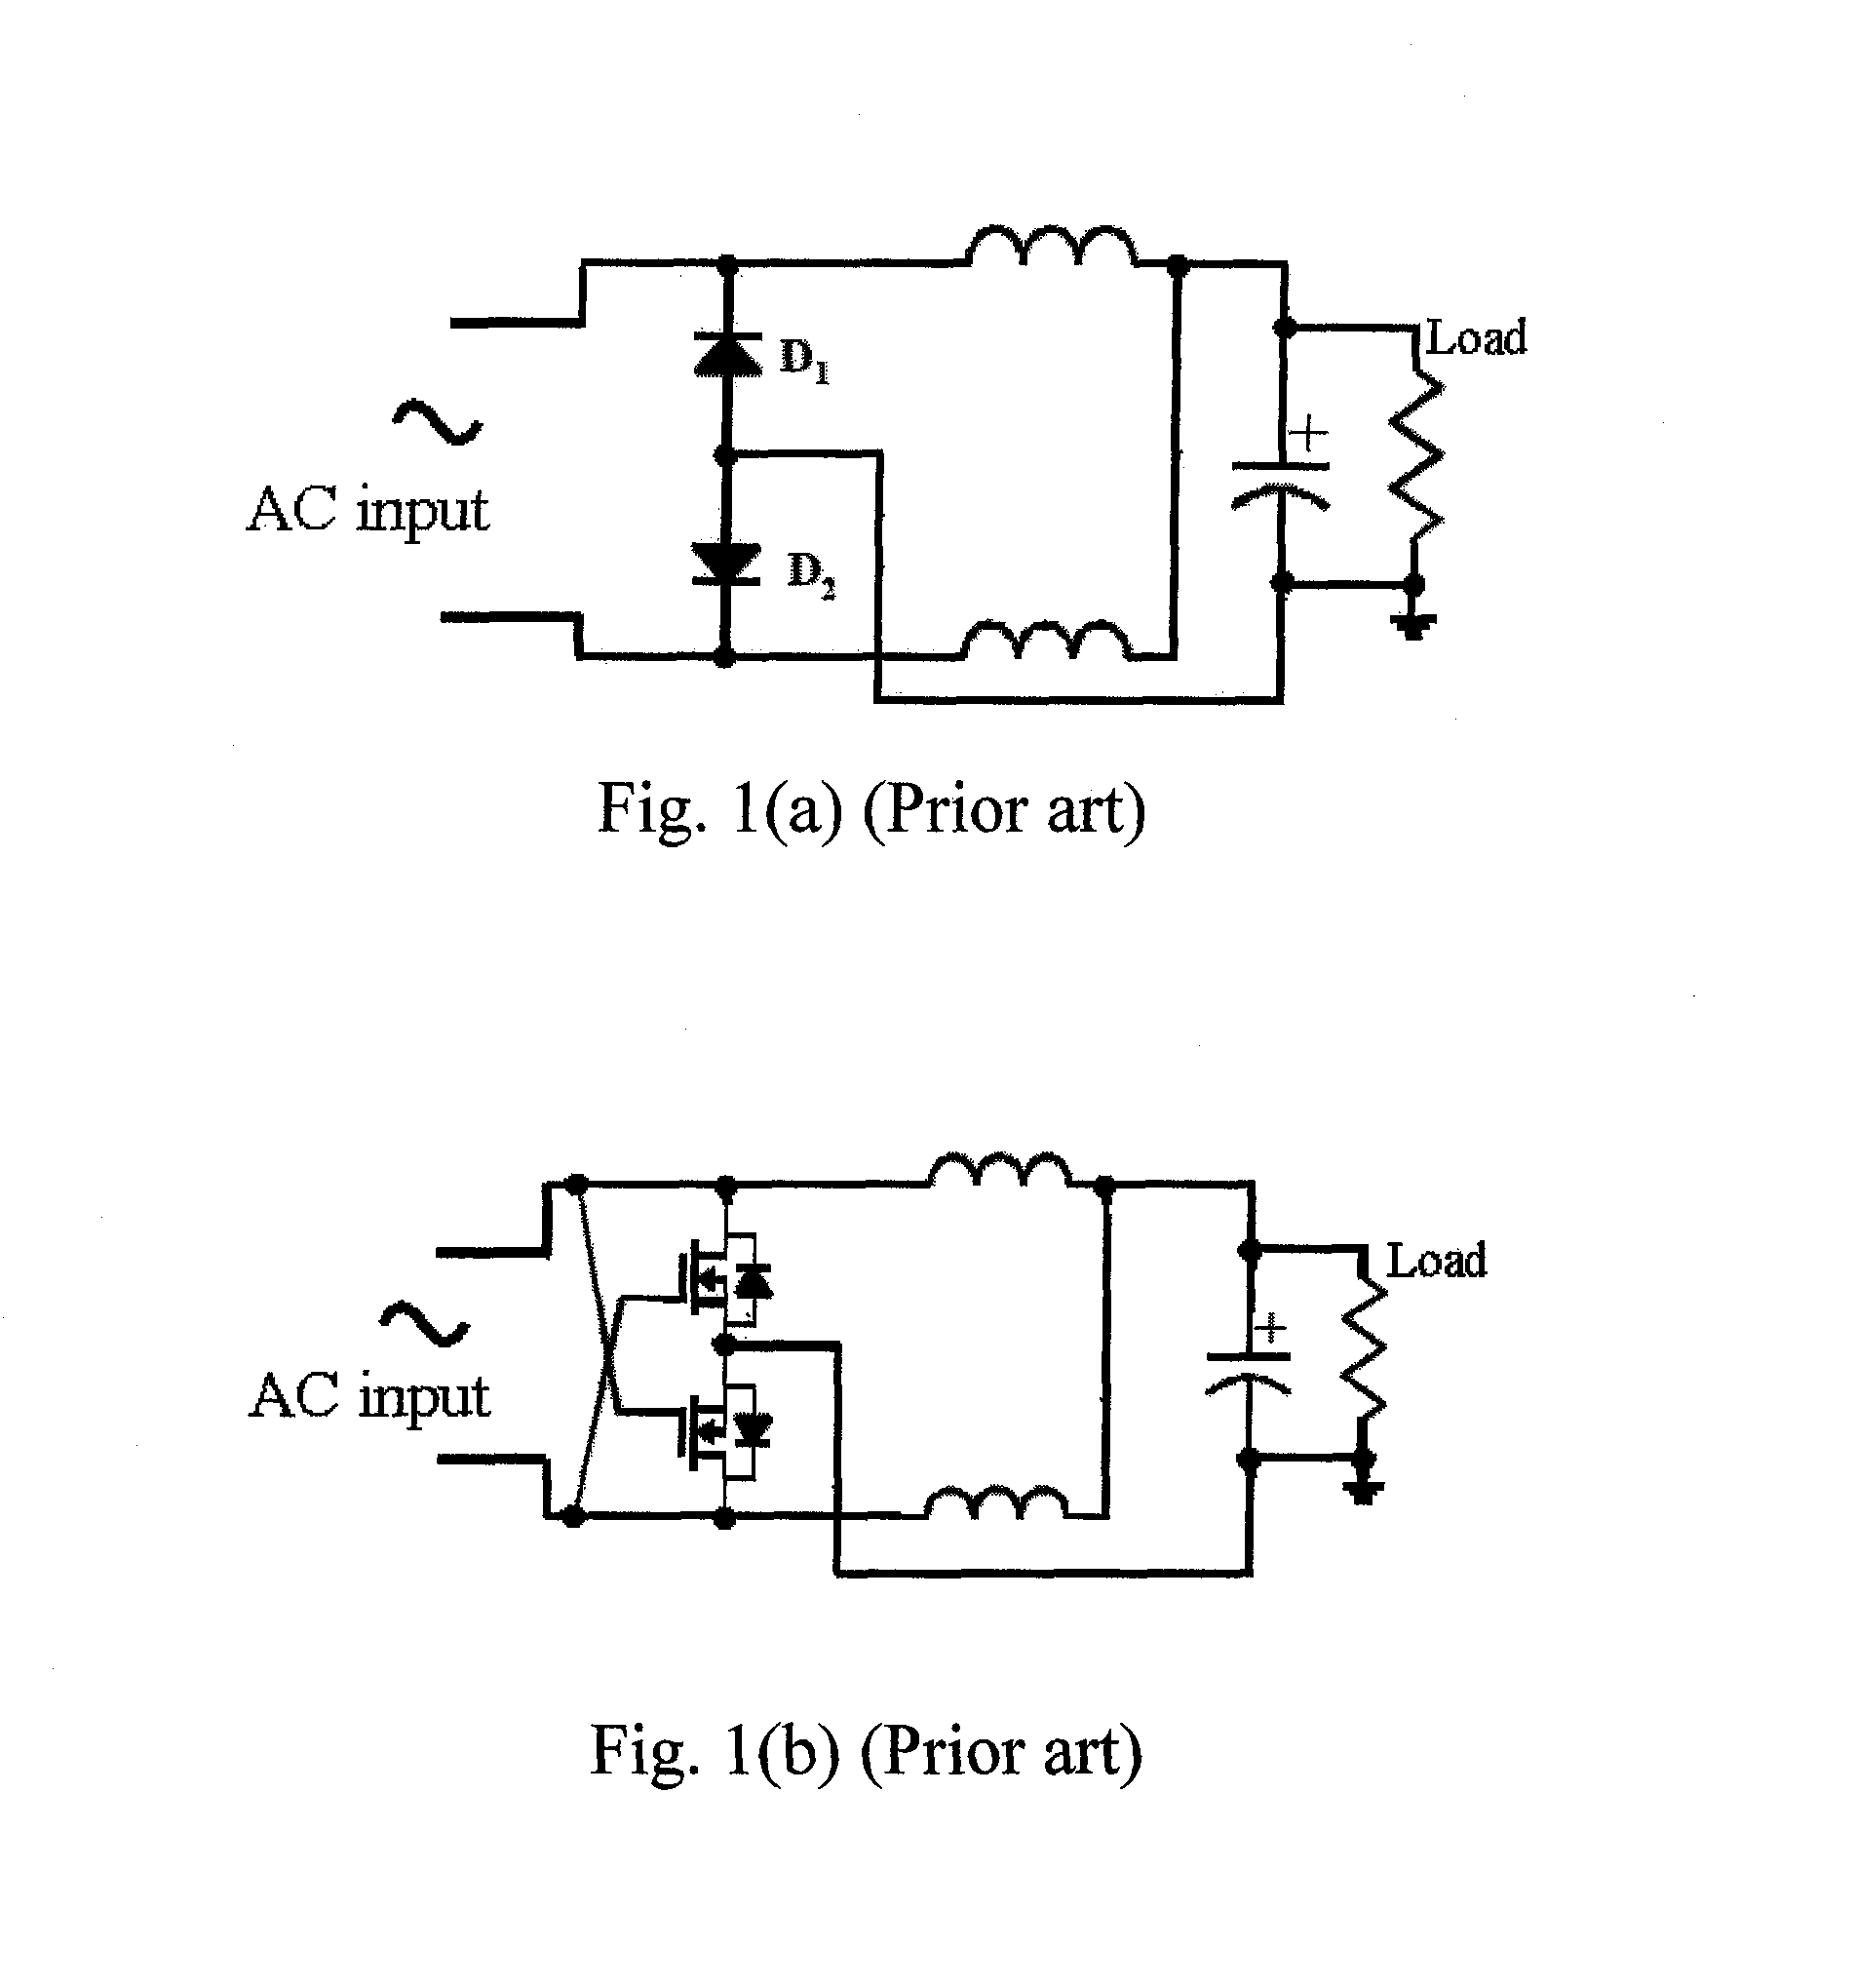 Generalized AC-DC synchronous rectification techniques for single- and multi-phase systems